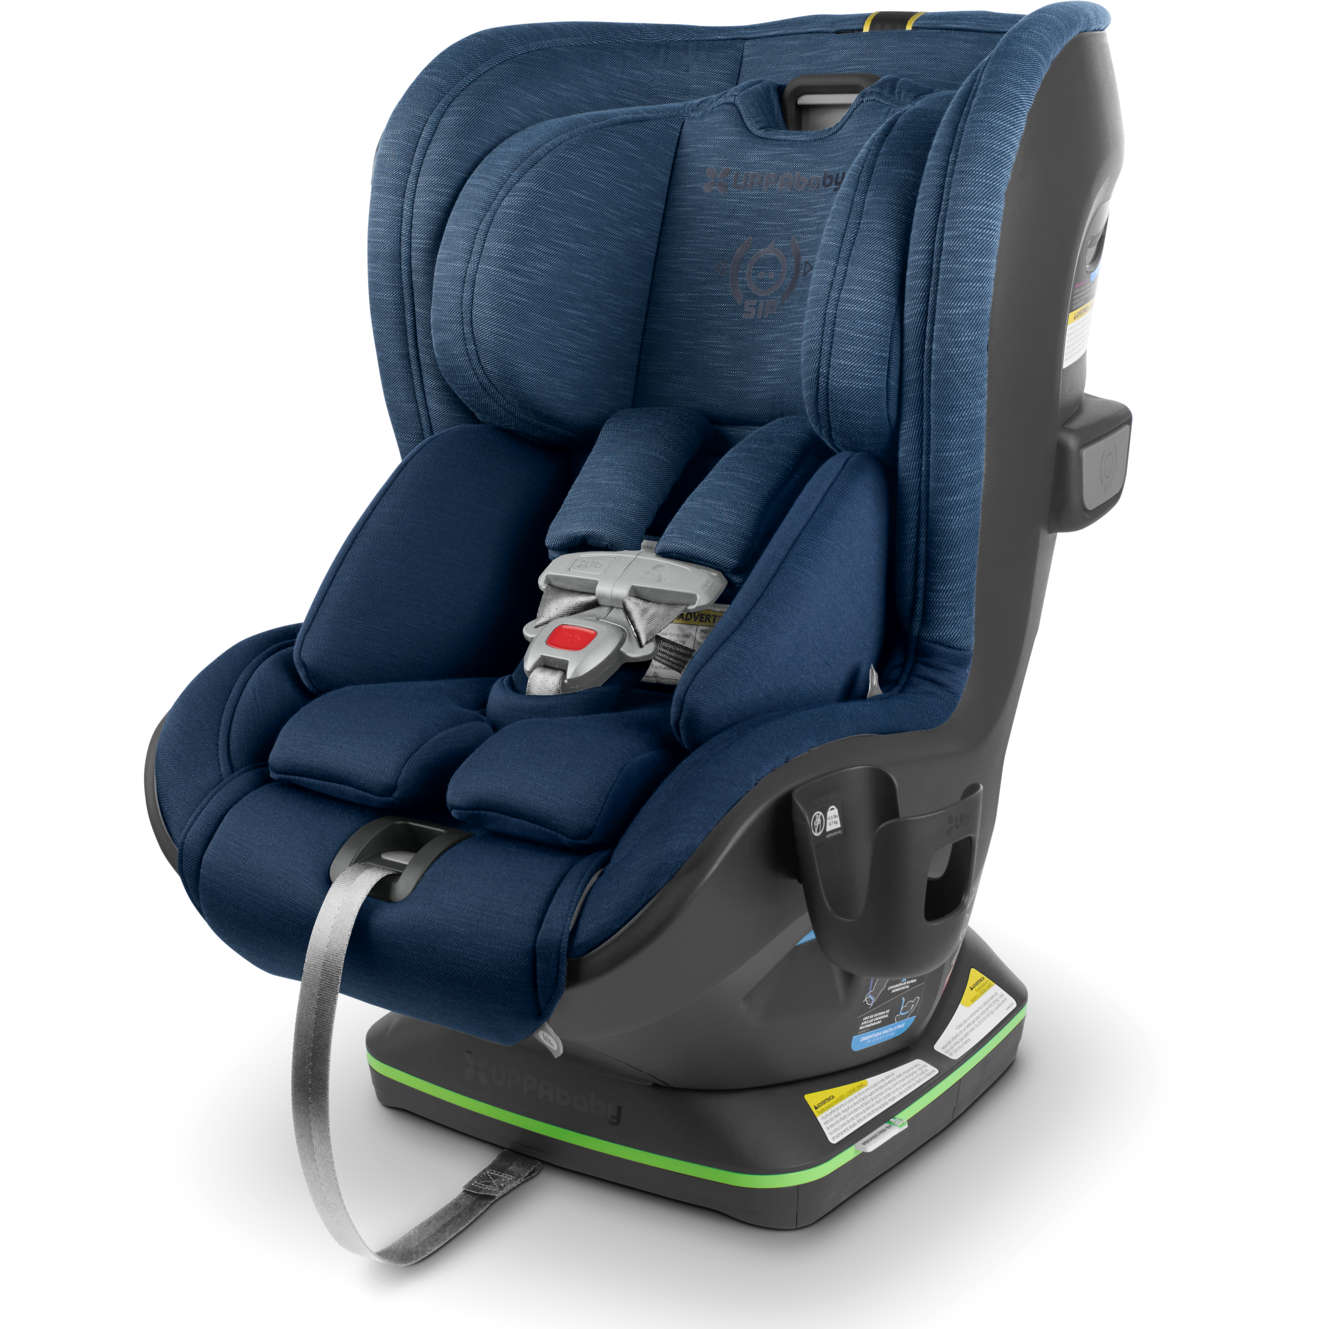 UPPAbaby Knox Convertible Car Seat - Twinkle Twinkle Little One